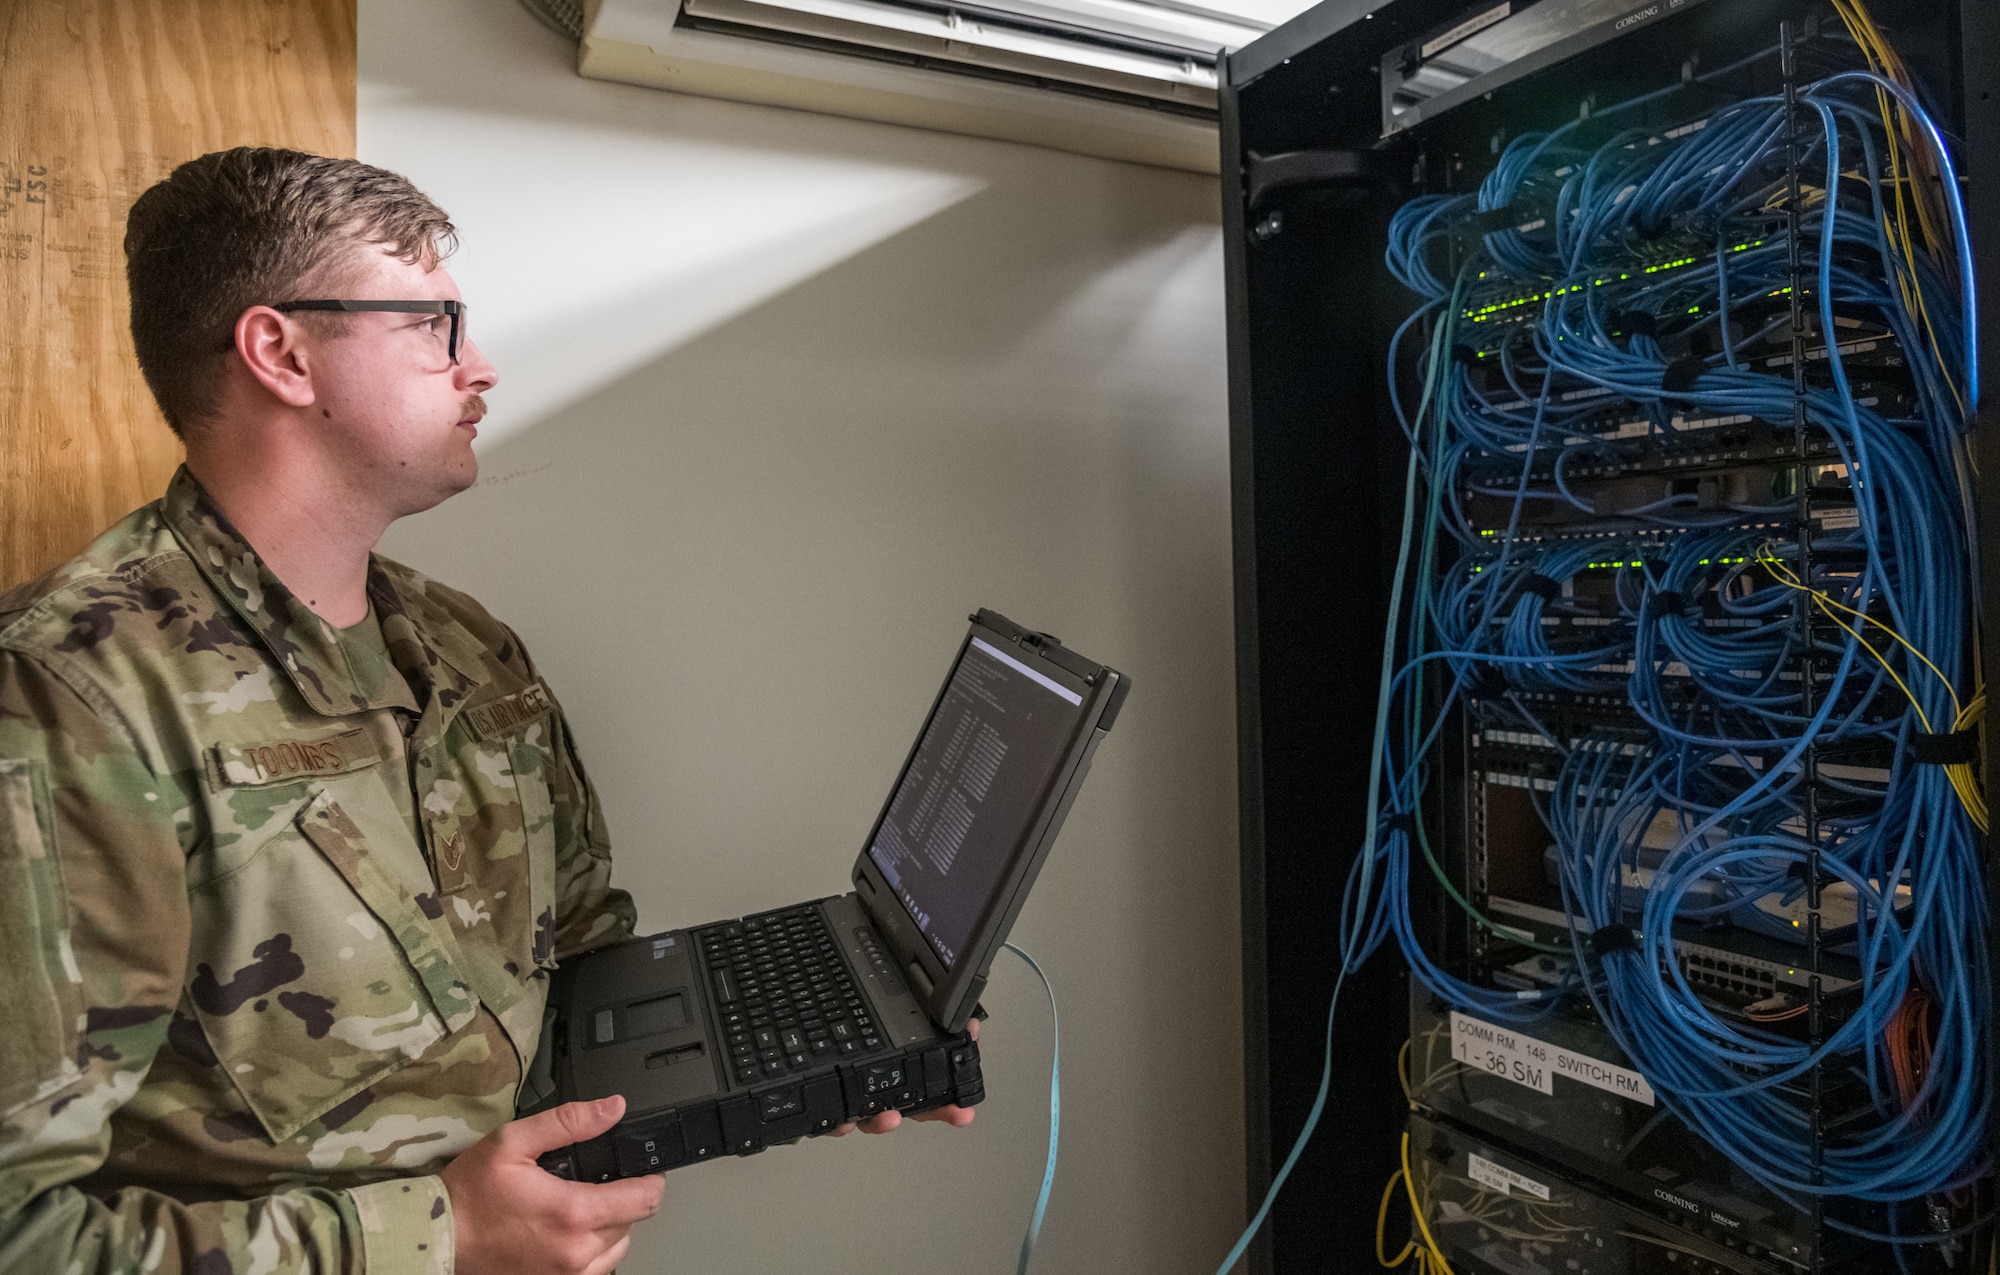 Staff Sgt. Joseph Toombs, 436th Communications Squadron cyber transport supervisor, verifies configurations of network equipment March 26, 2020, on Dover Air Force Base, Delaware. Toombs and other 436th CS personnel ensured that both personnel required to be at work had connectivity to the base network while others teleworked from home to mitigate the spread of COVID-19. (U.S. Air Force photo by Roland Balik)